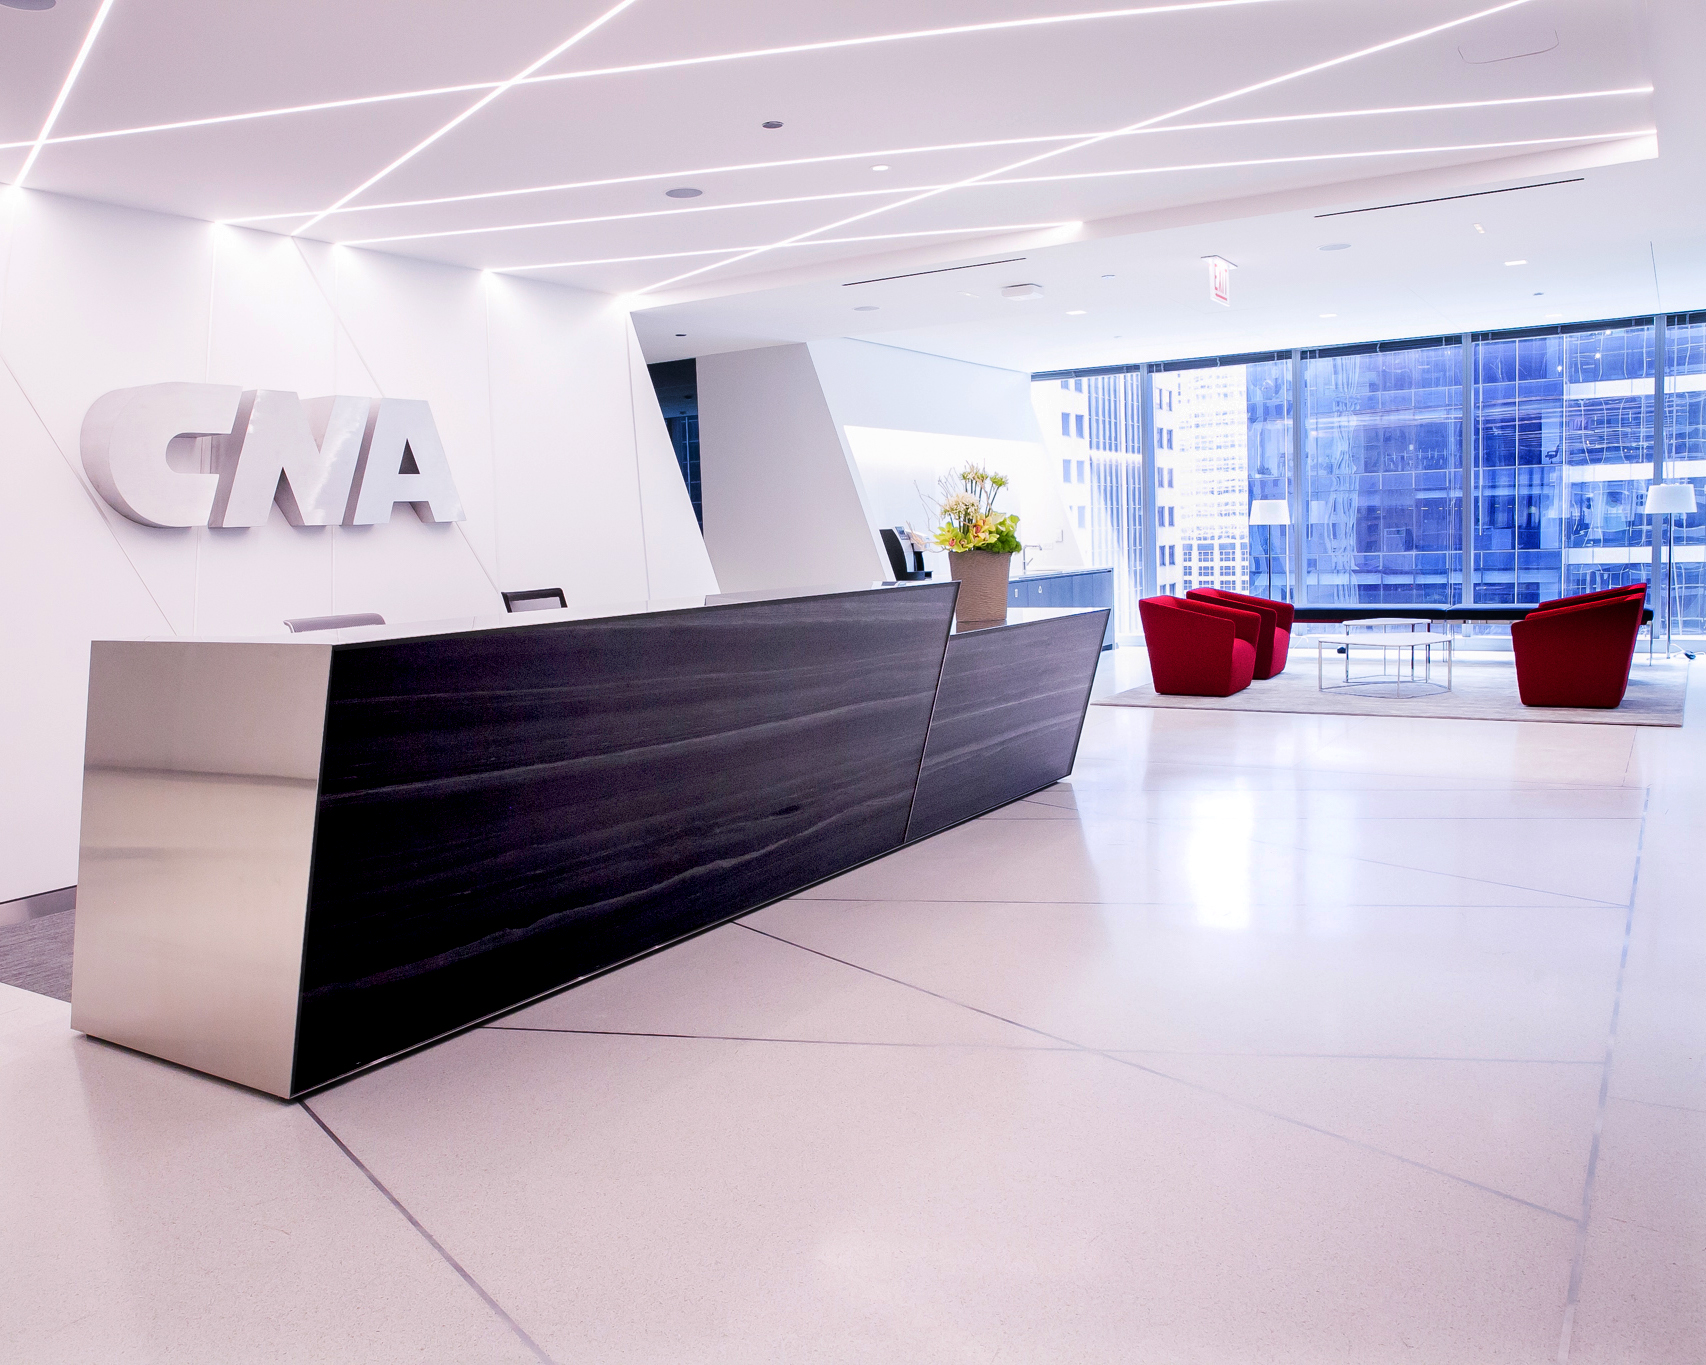 front lobby and reception desk of CNA HQ with white logo on the wall